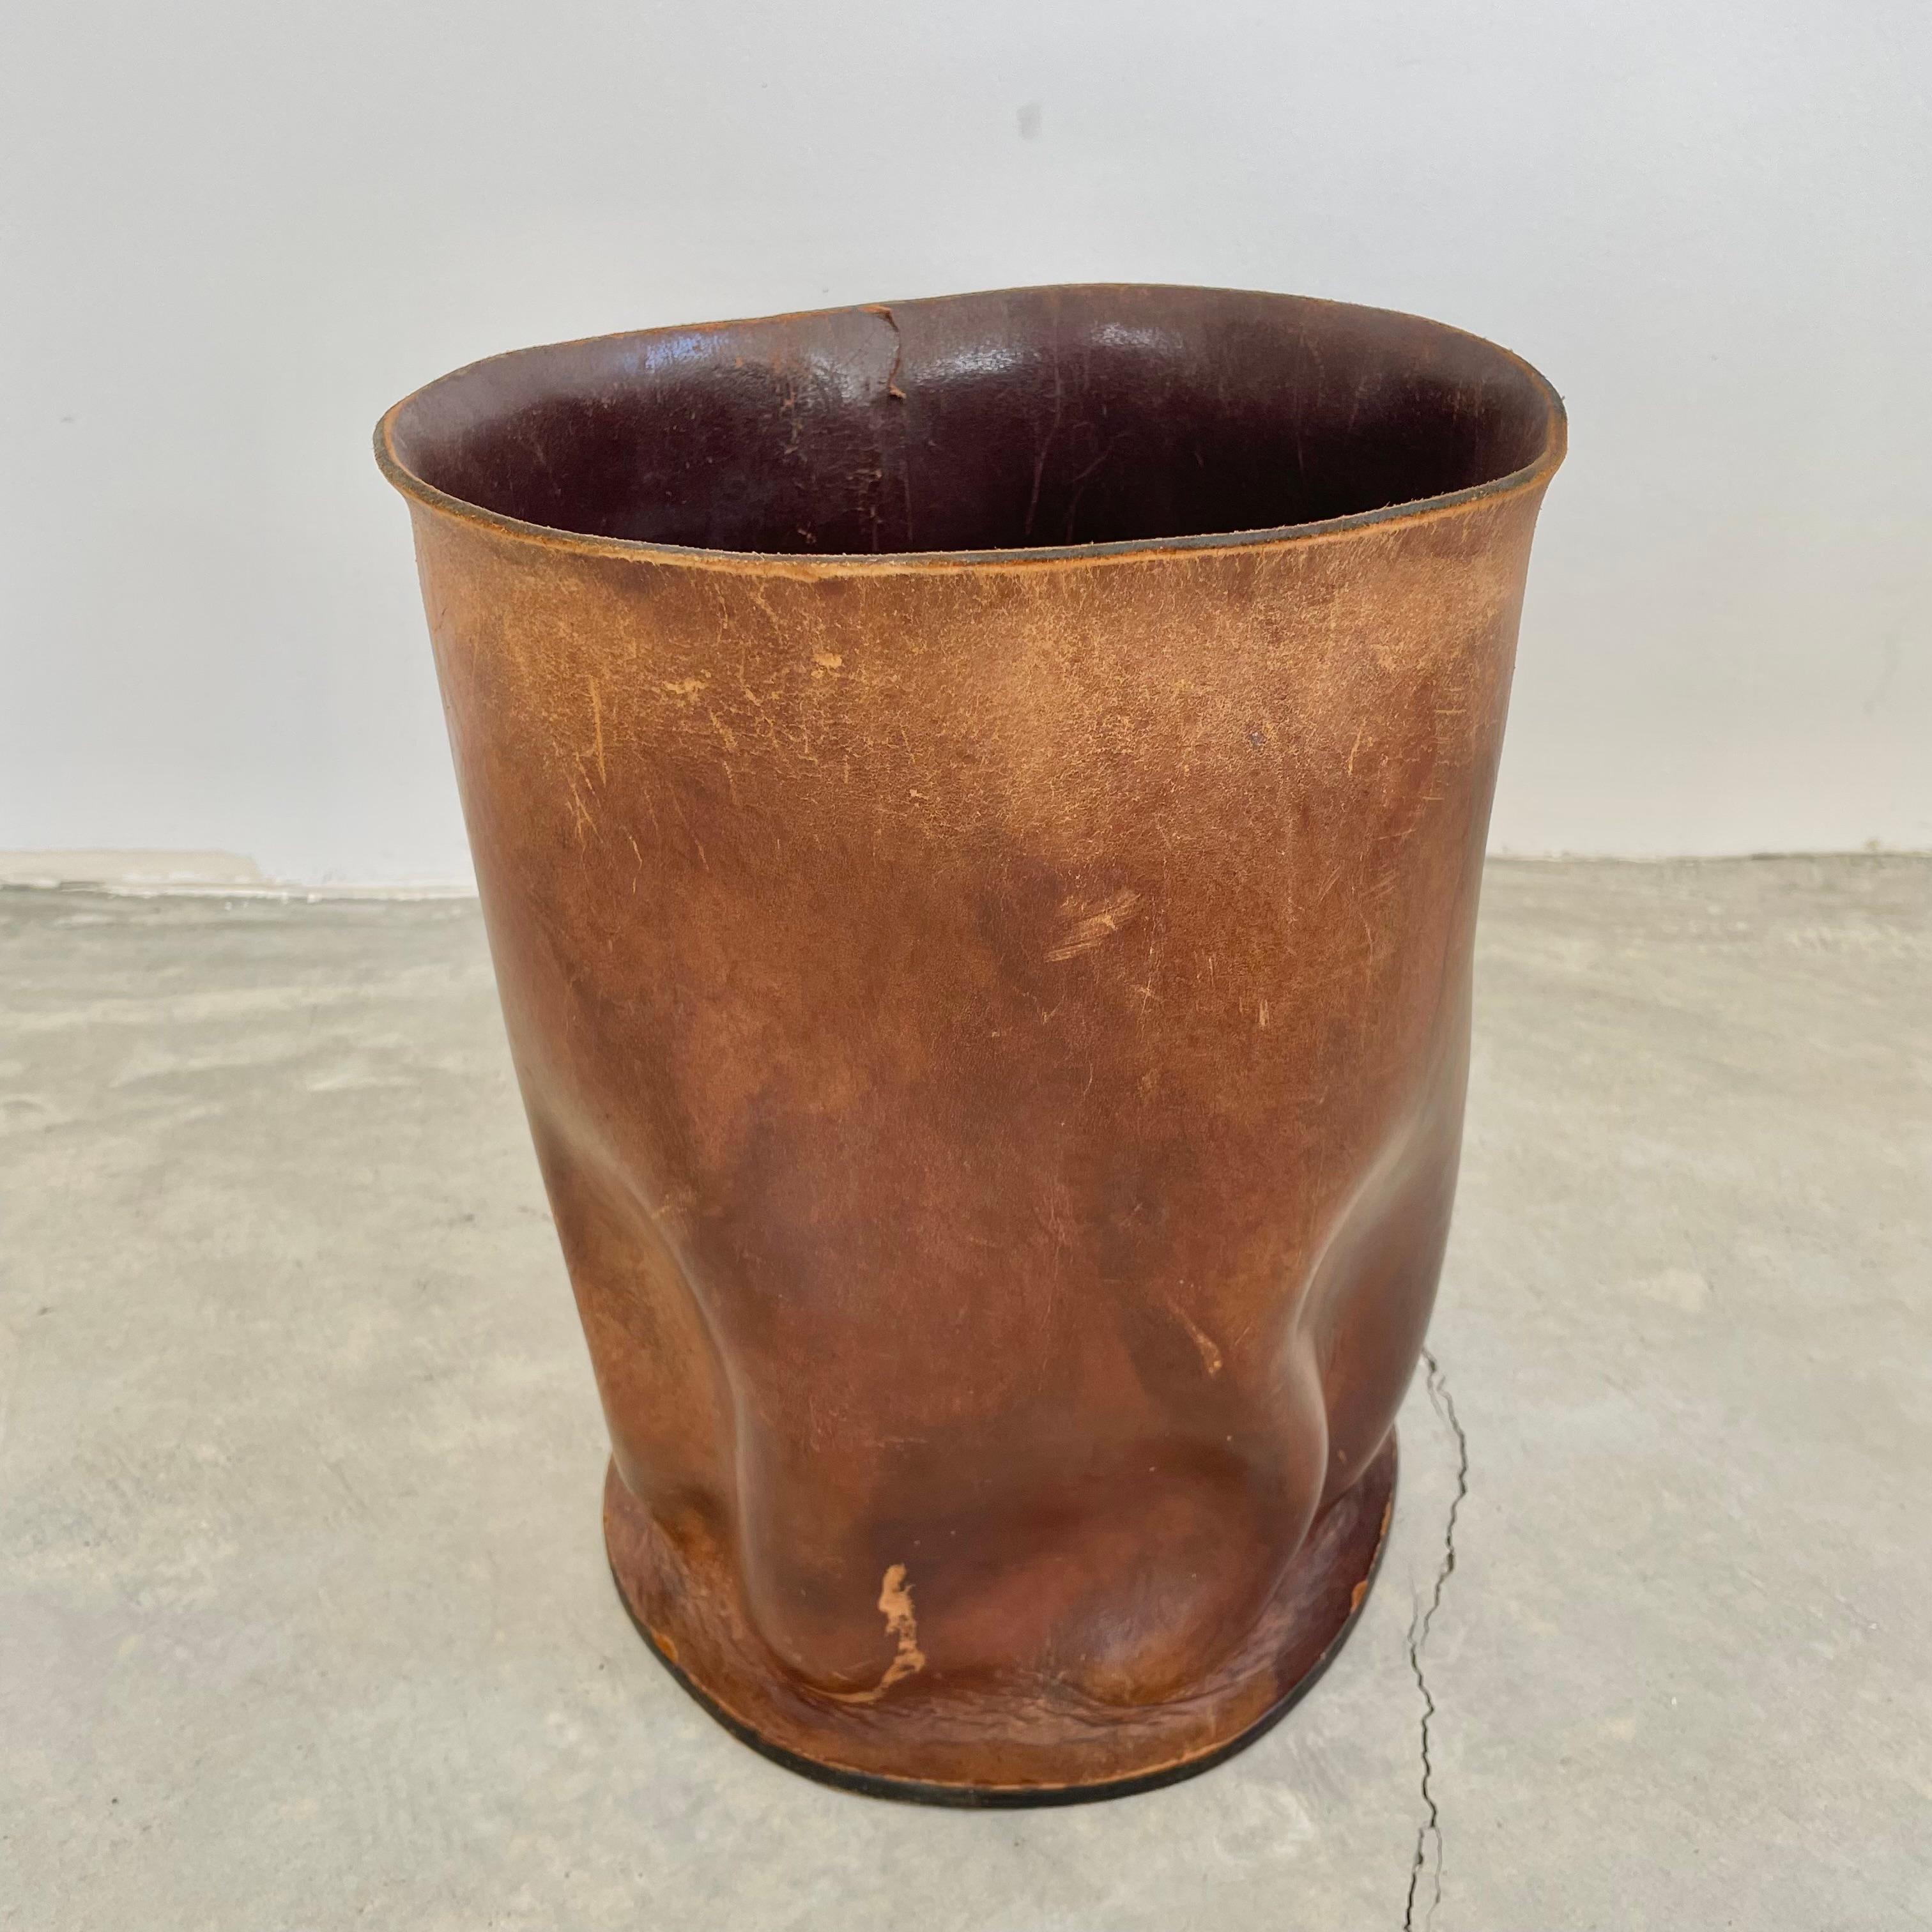 Incredible distressed cowhide waste bin. Leather displays folds and ruffles due to years of wear and use giving it a stunning patina. Interior of bin is finished in a chocolate brown dye which shows cracking and fading giving it a one of a kind